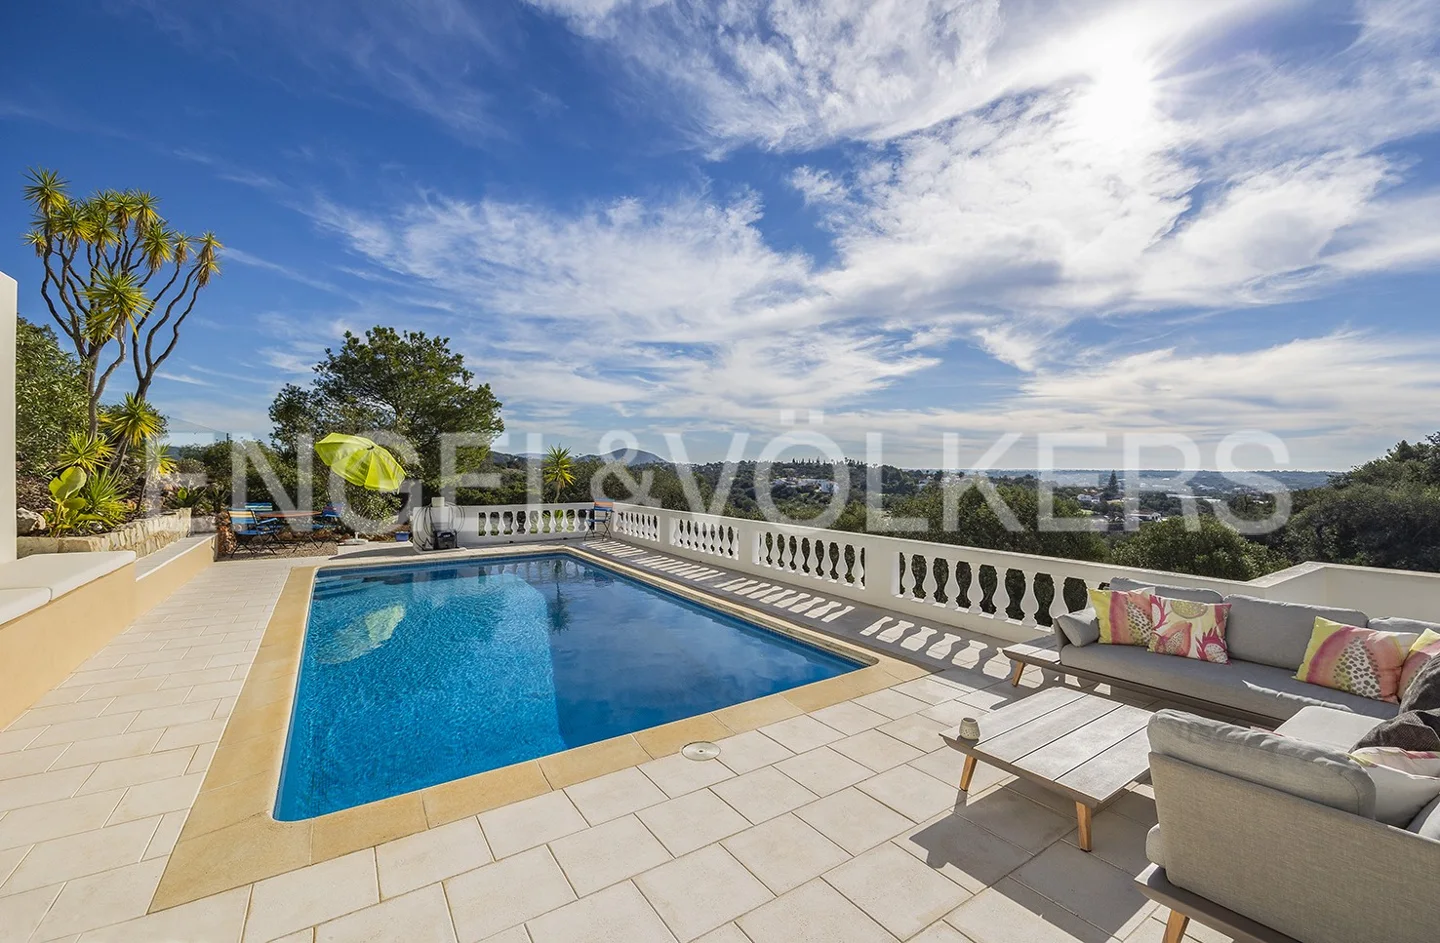 5 minutes away from Vilamoura, a charming villa with panoramic views and exceptional versatility.